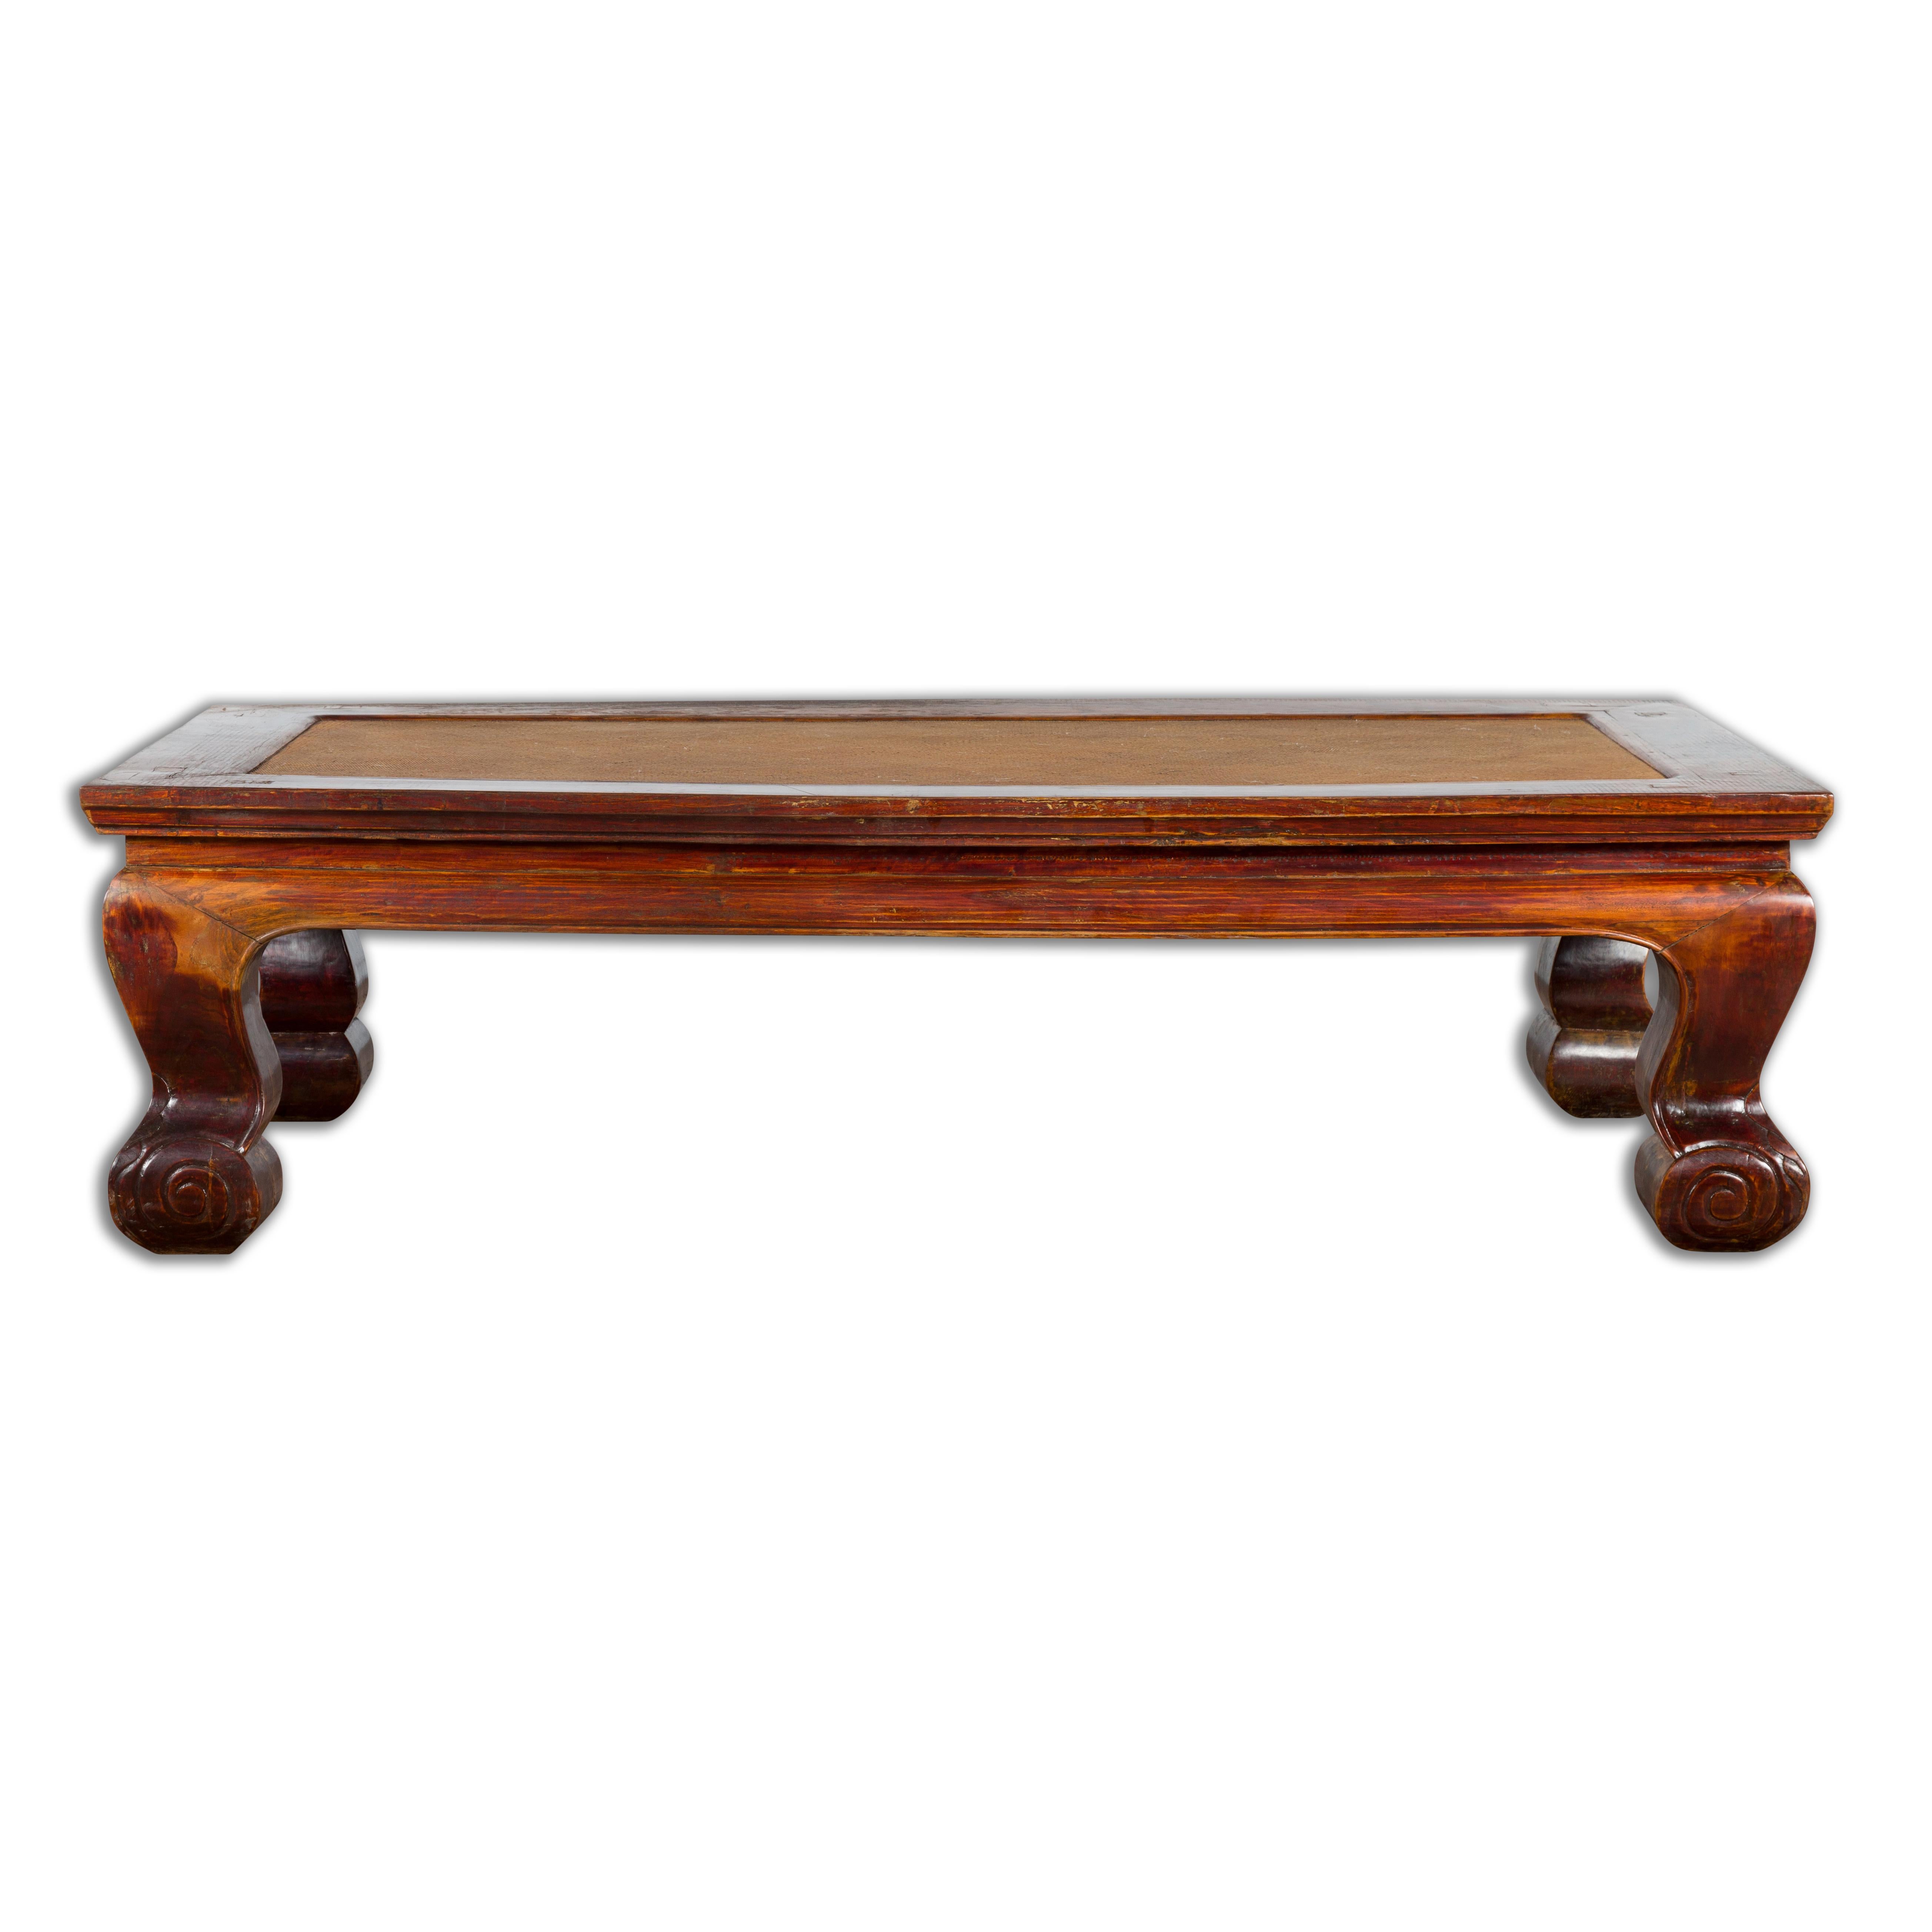 Chinese Qing Dynasty Period 19th Century Elm Coffee Table with Rattan Top For Sale 9